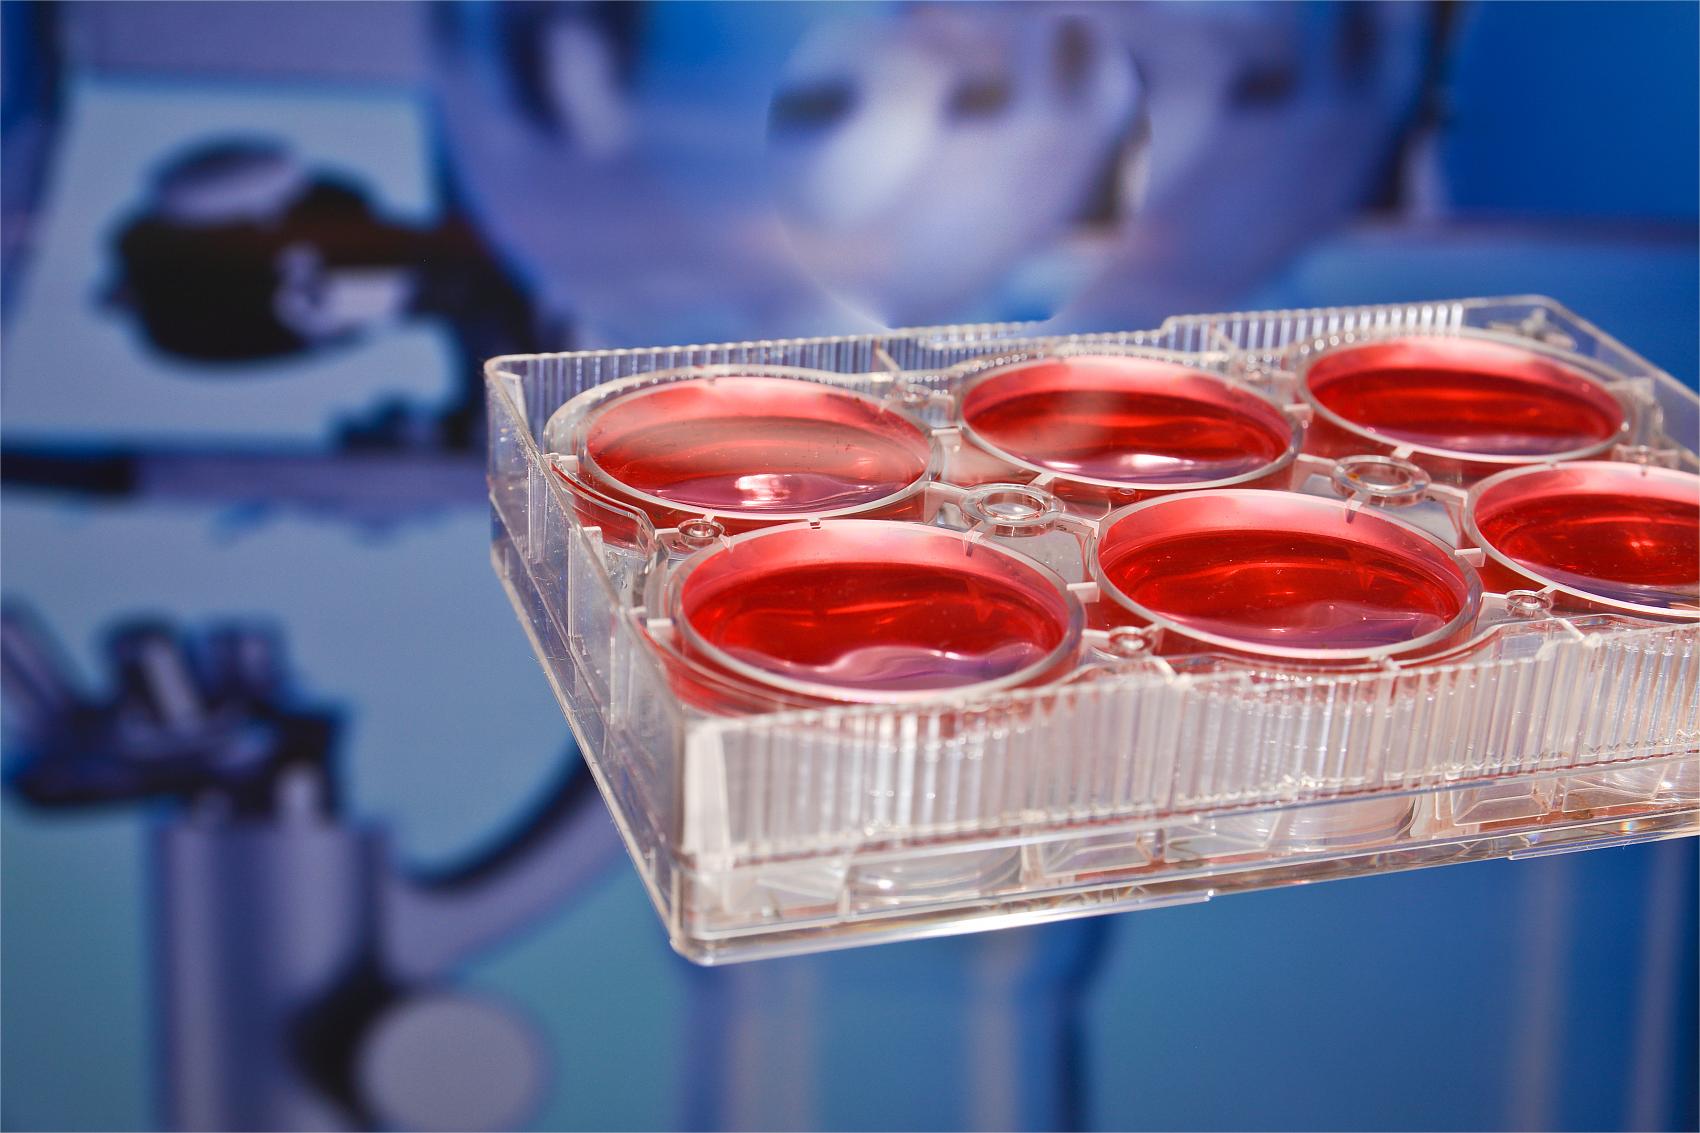 cell culture plates